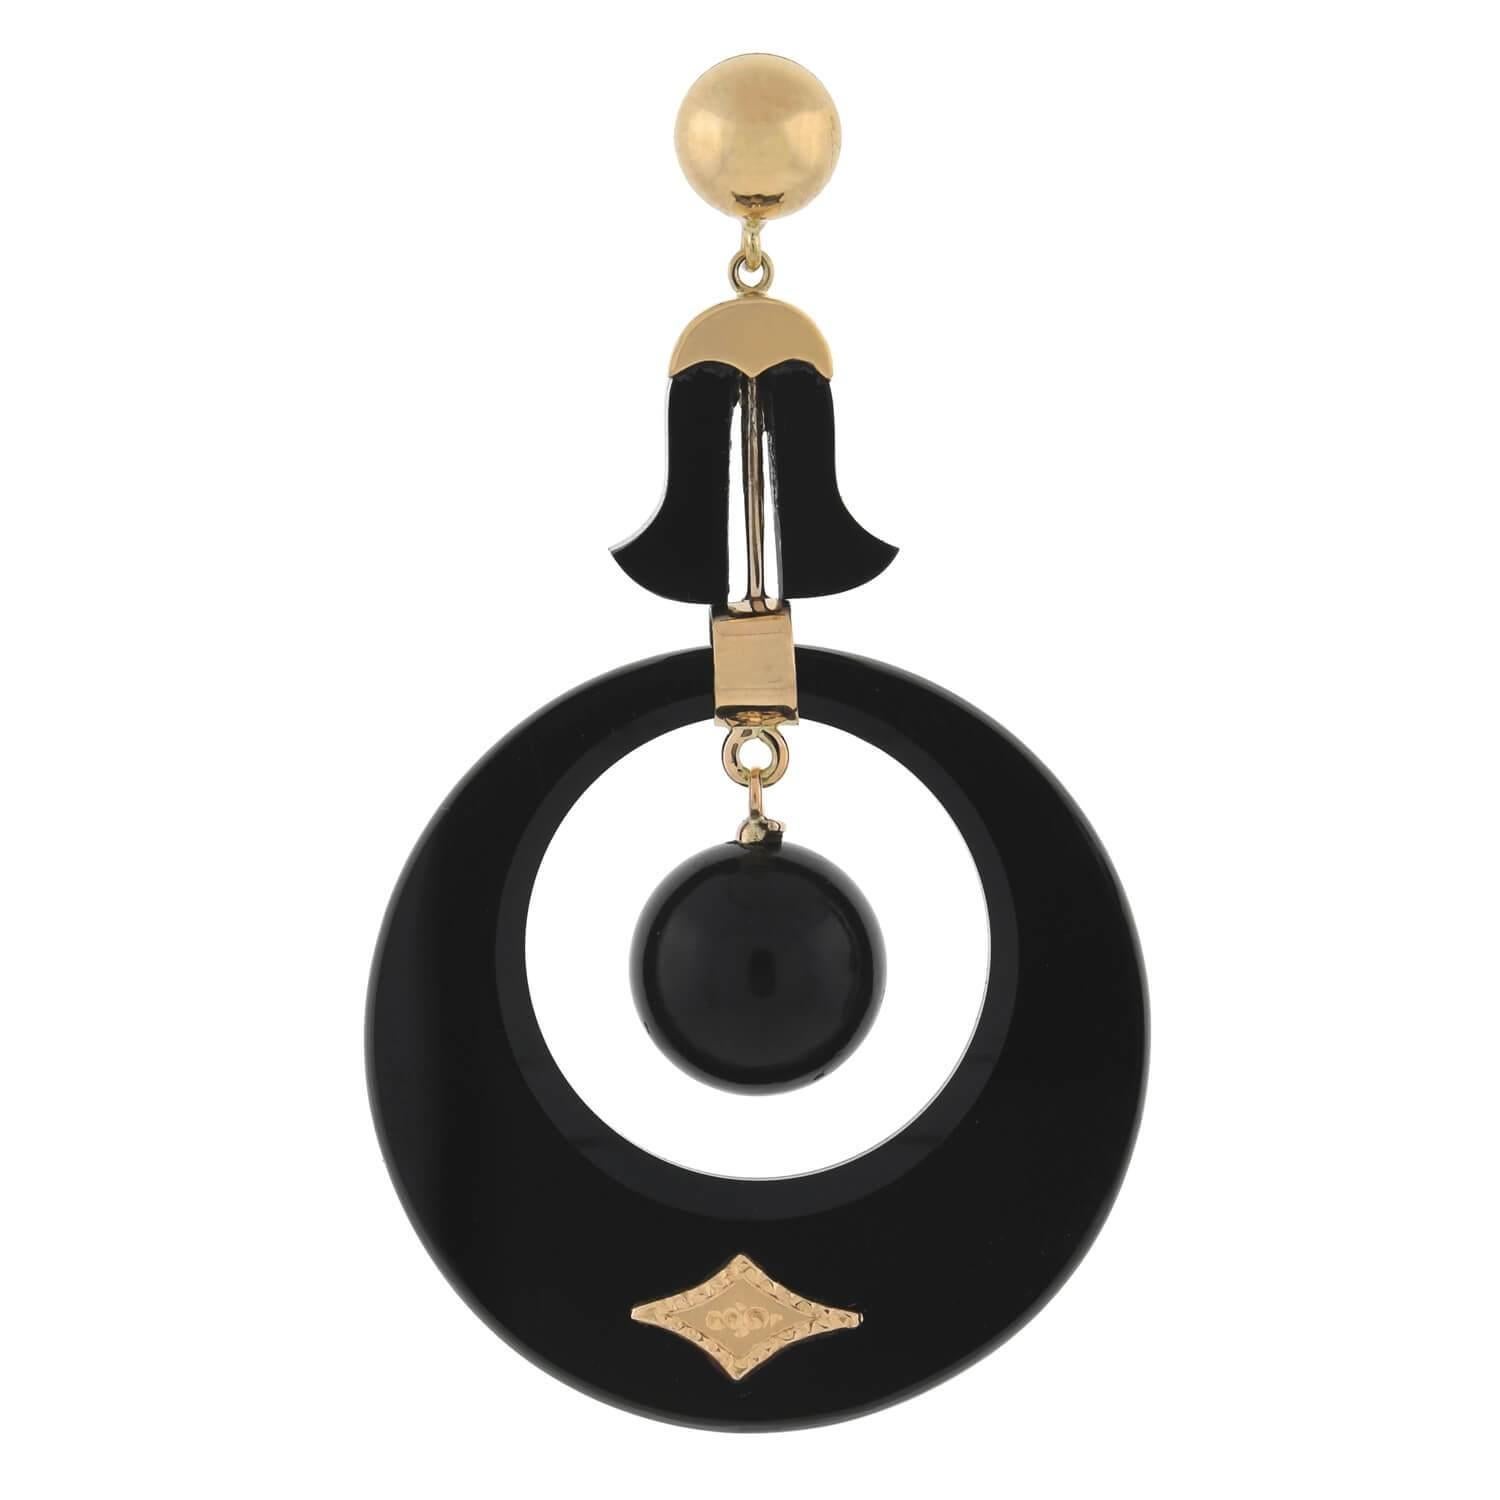 A fabulous pair of carved onyx earrings from the Victorian (ca1880) era! Crafted in 14kt rosy yellow gold, each earring features a stunning front facing carved onyx hoop which dangles a large onyx bead at the center. The polished onyx reflects the